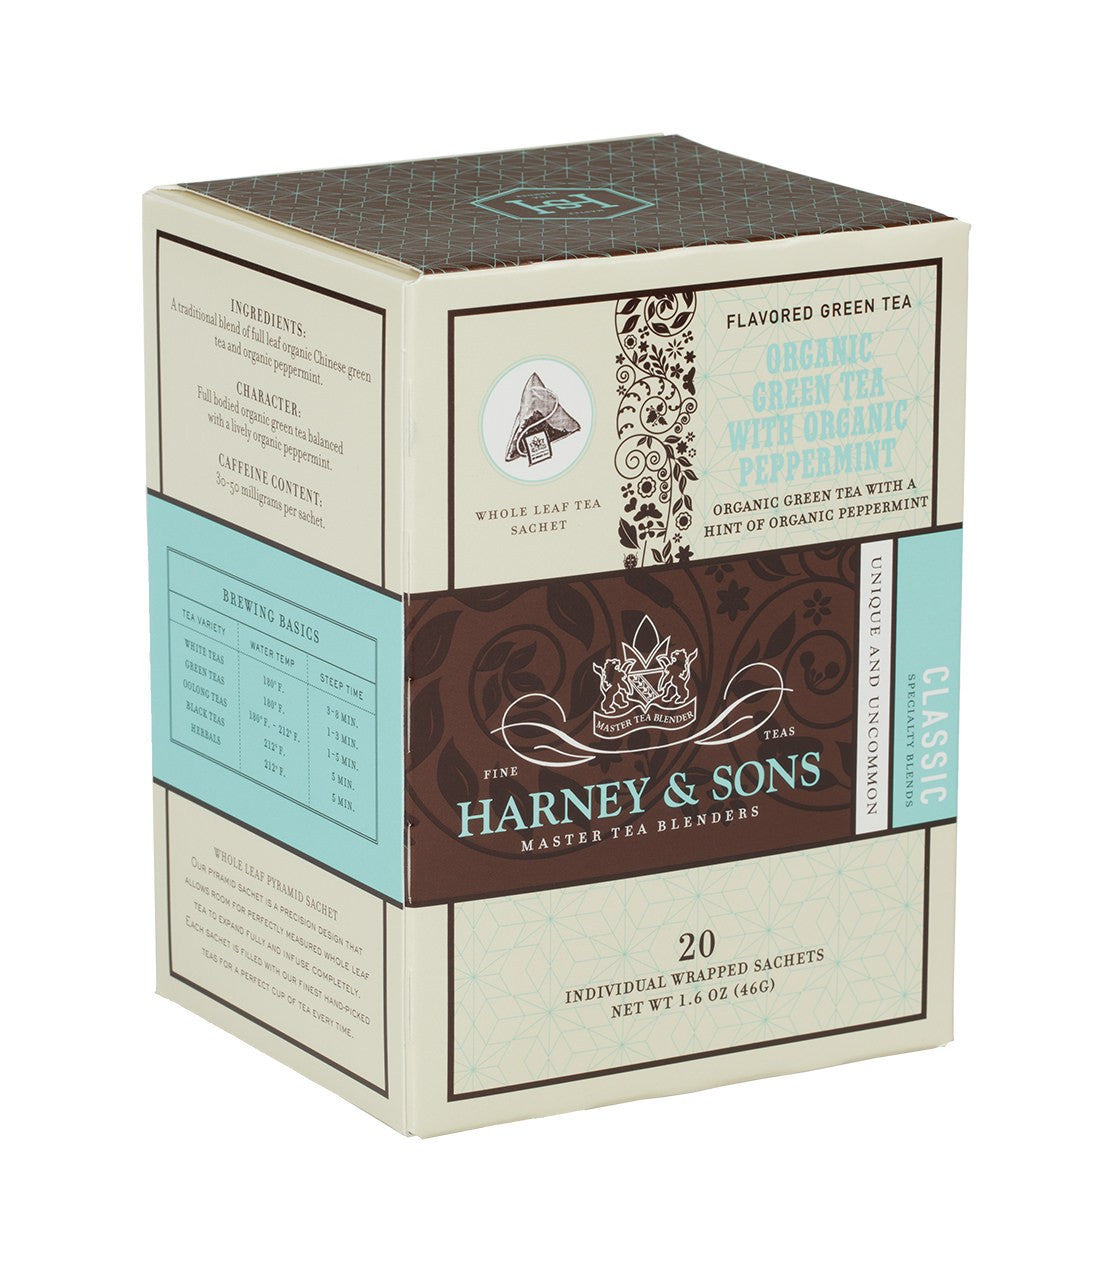 Organic Green Tea with Organic Peppermint - Sachets Box of 20 Individually Wrapped Sachets - Harney & Sons Fine Teas